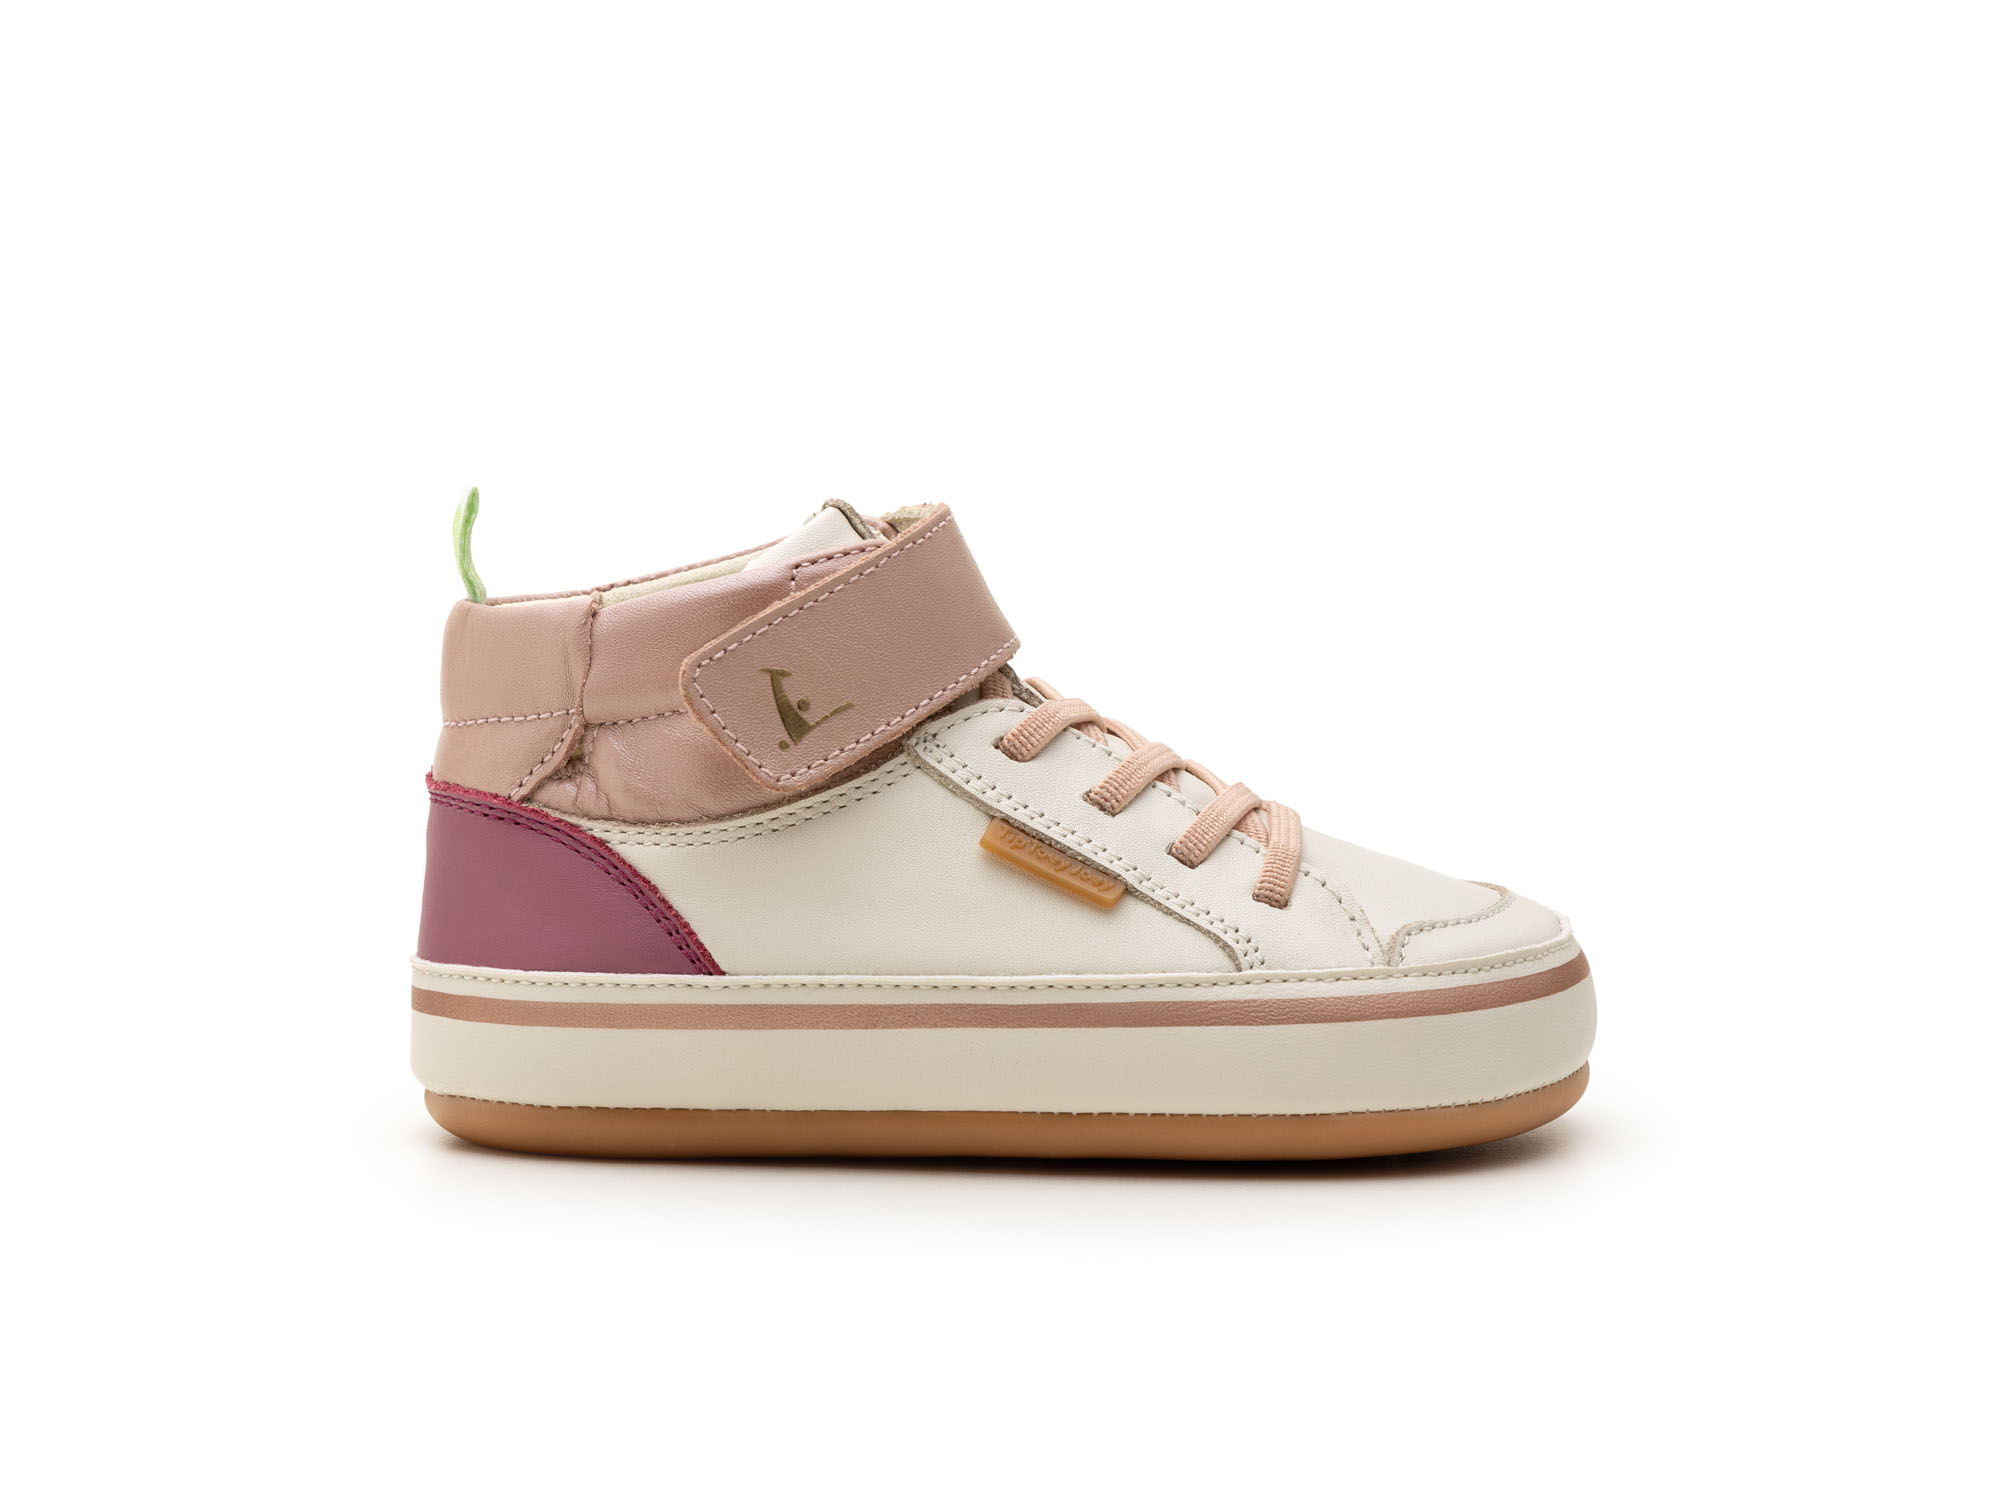 UP & GO Sneakers for Girls Alley | Tip Toey Joey - Australia - 4